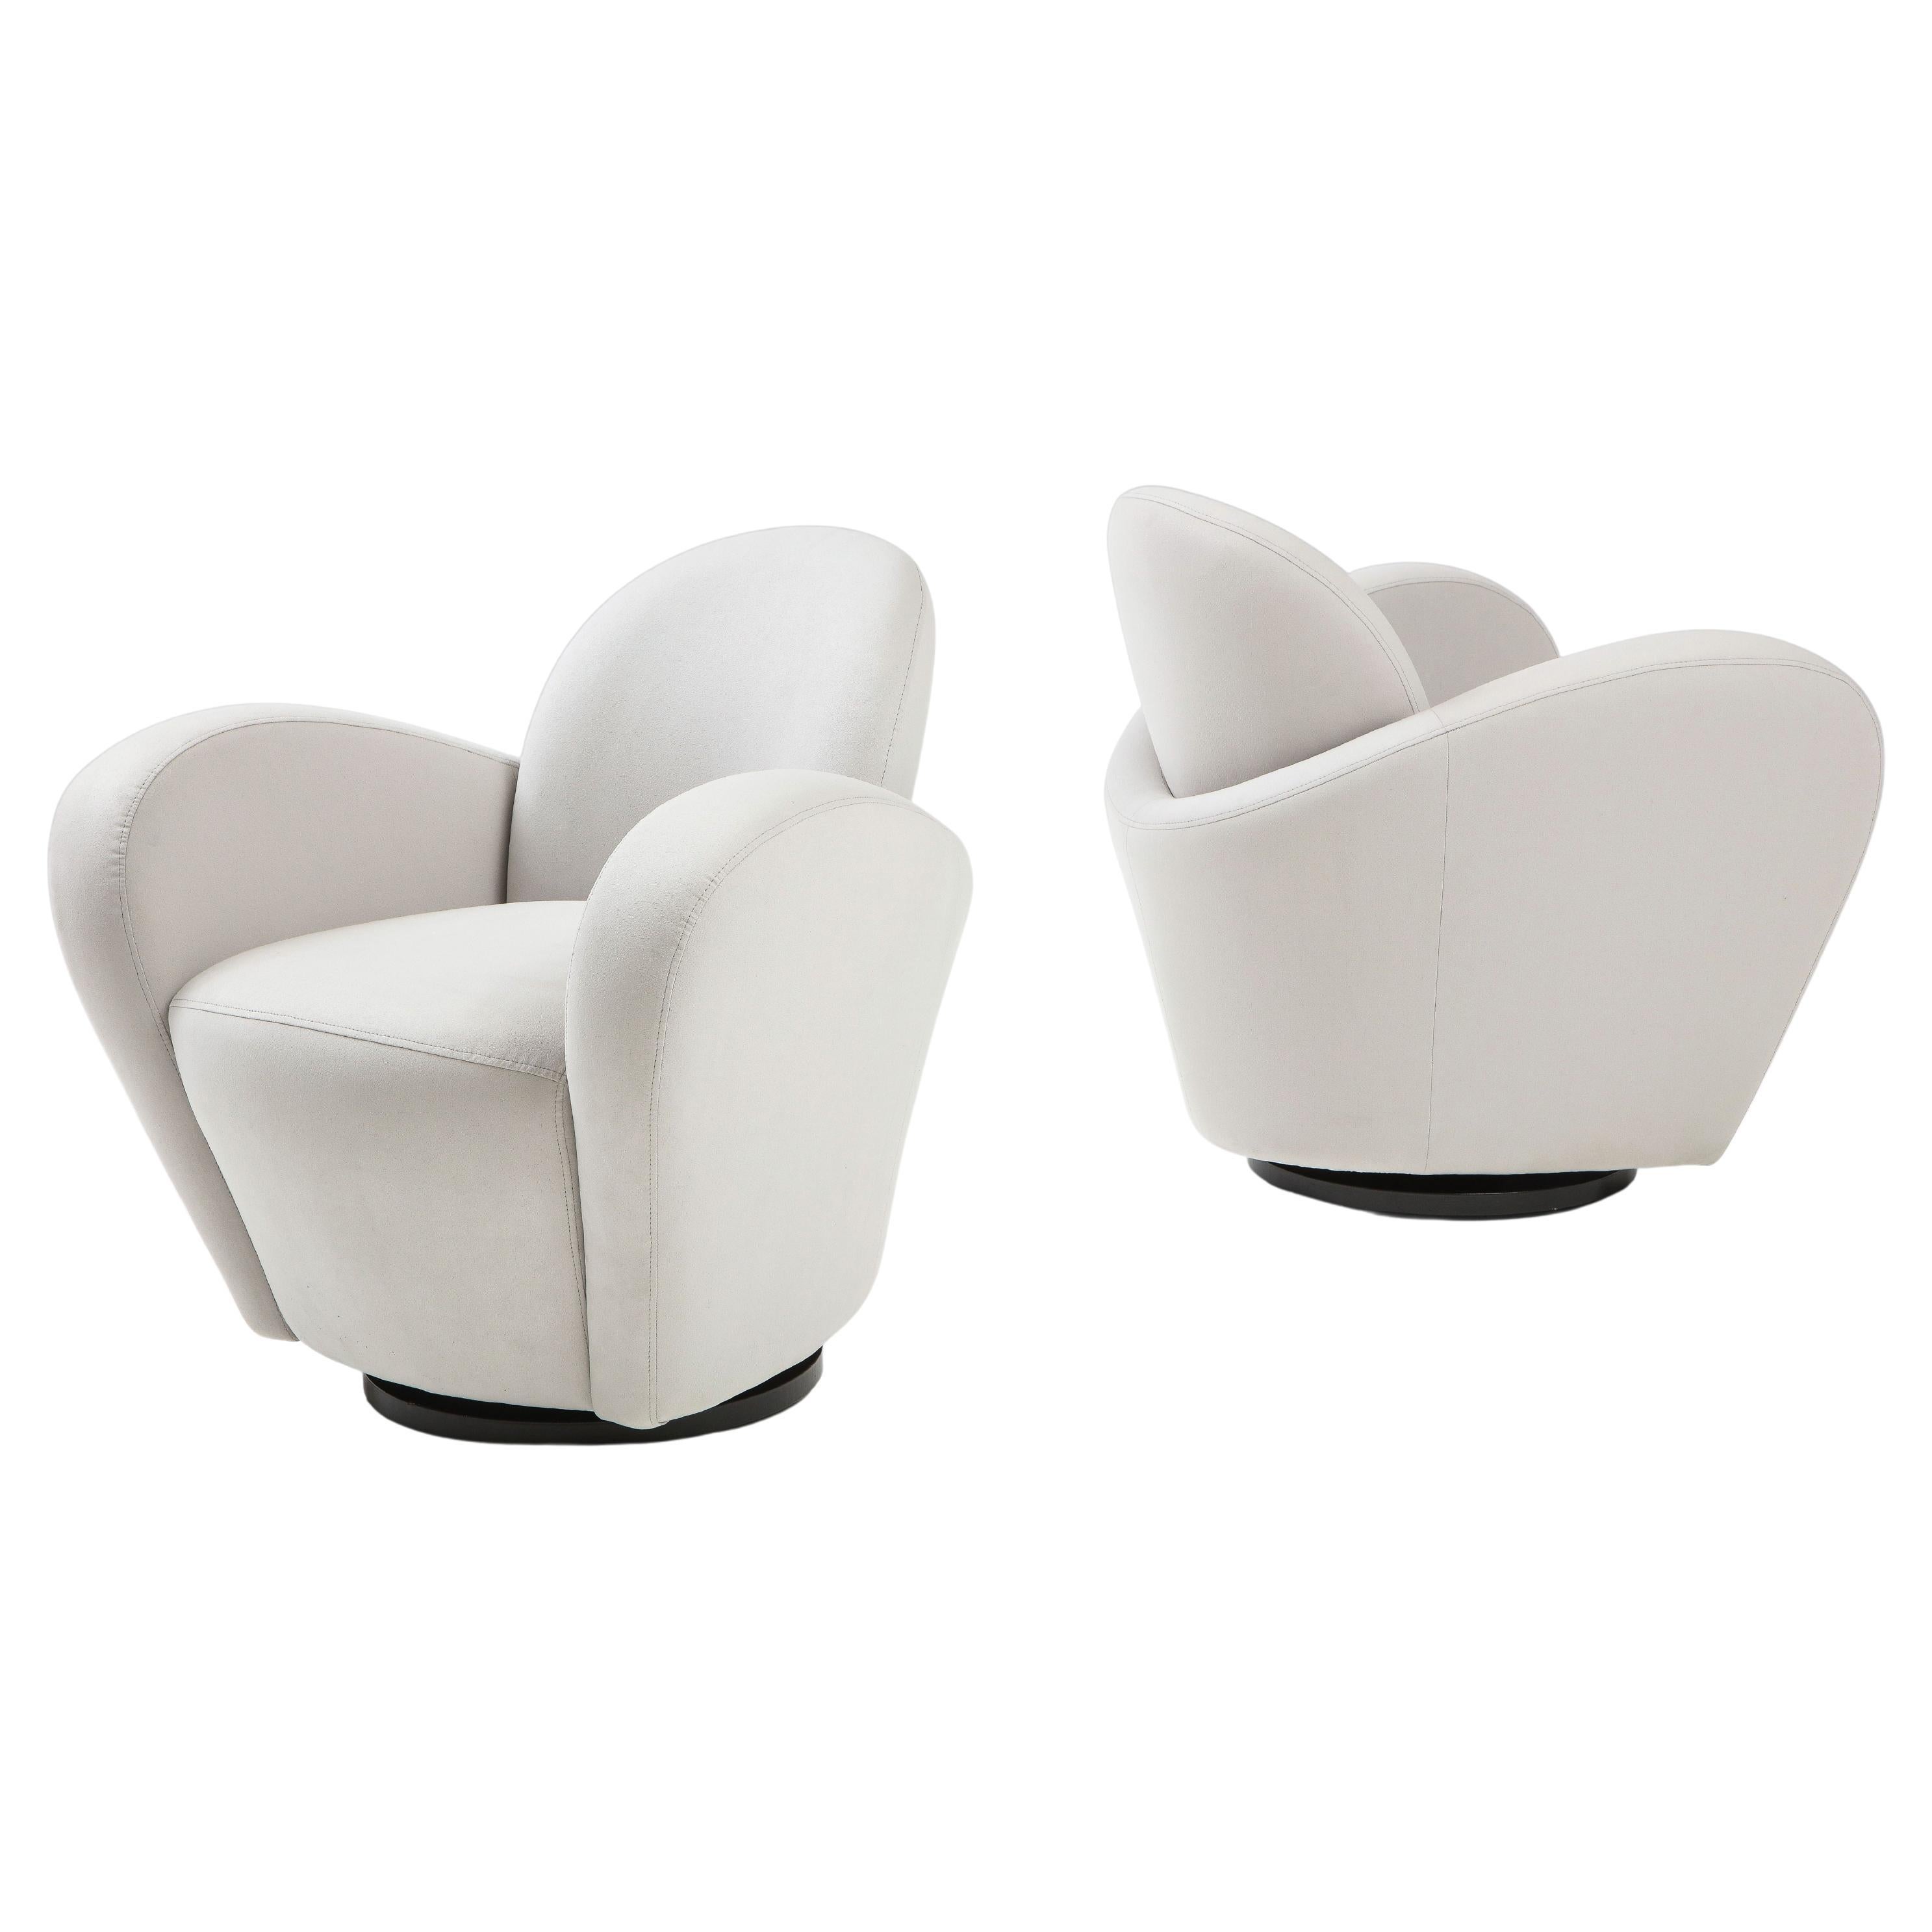 Michael Wolk for Directional pairs or set of four swivel lounge chairs in light gray Sensuede with elegantly curved wraparound arms which taper down towards the bottom and resting on a black wooden swivel base. This iconic and chic design is playful